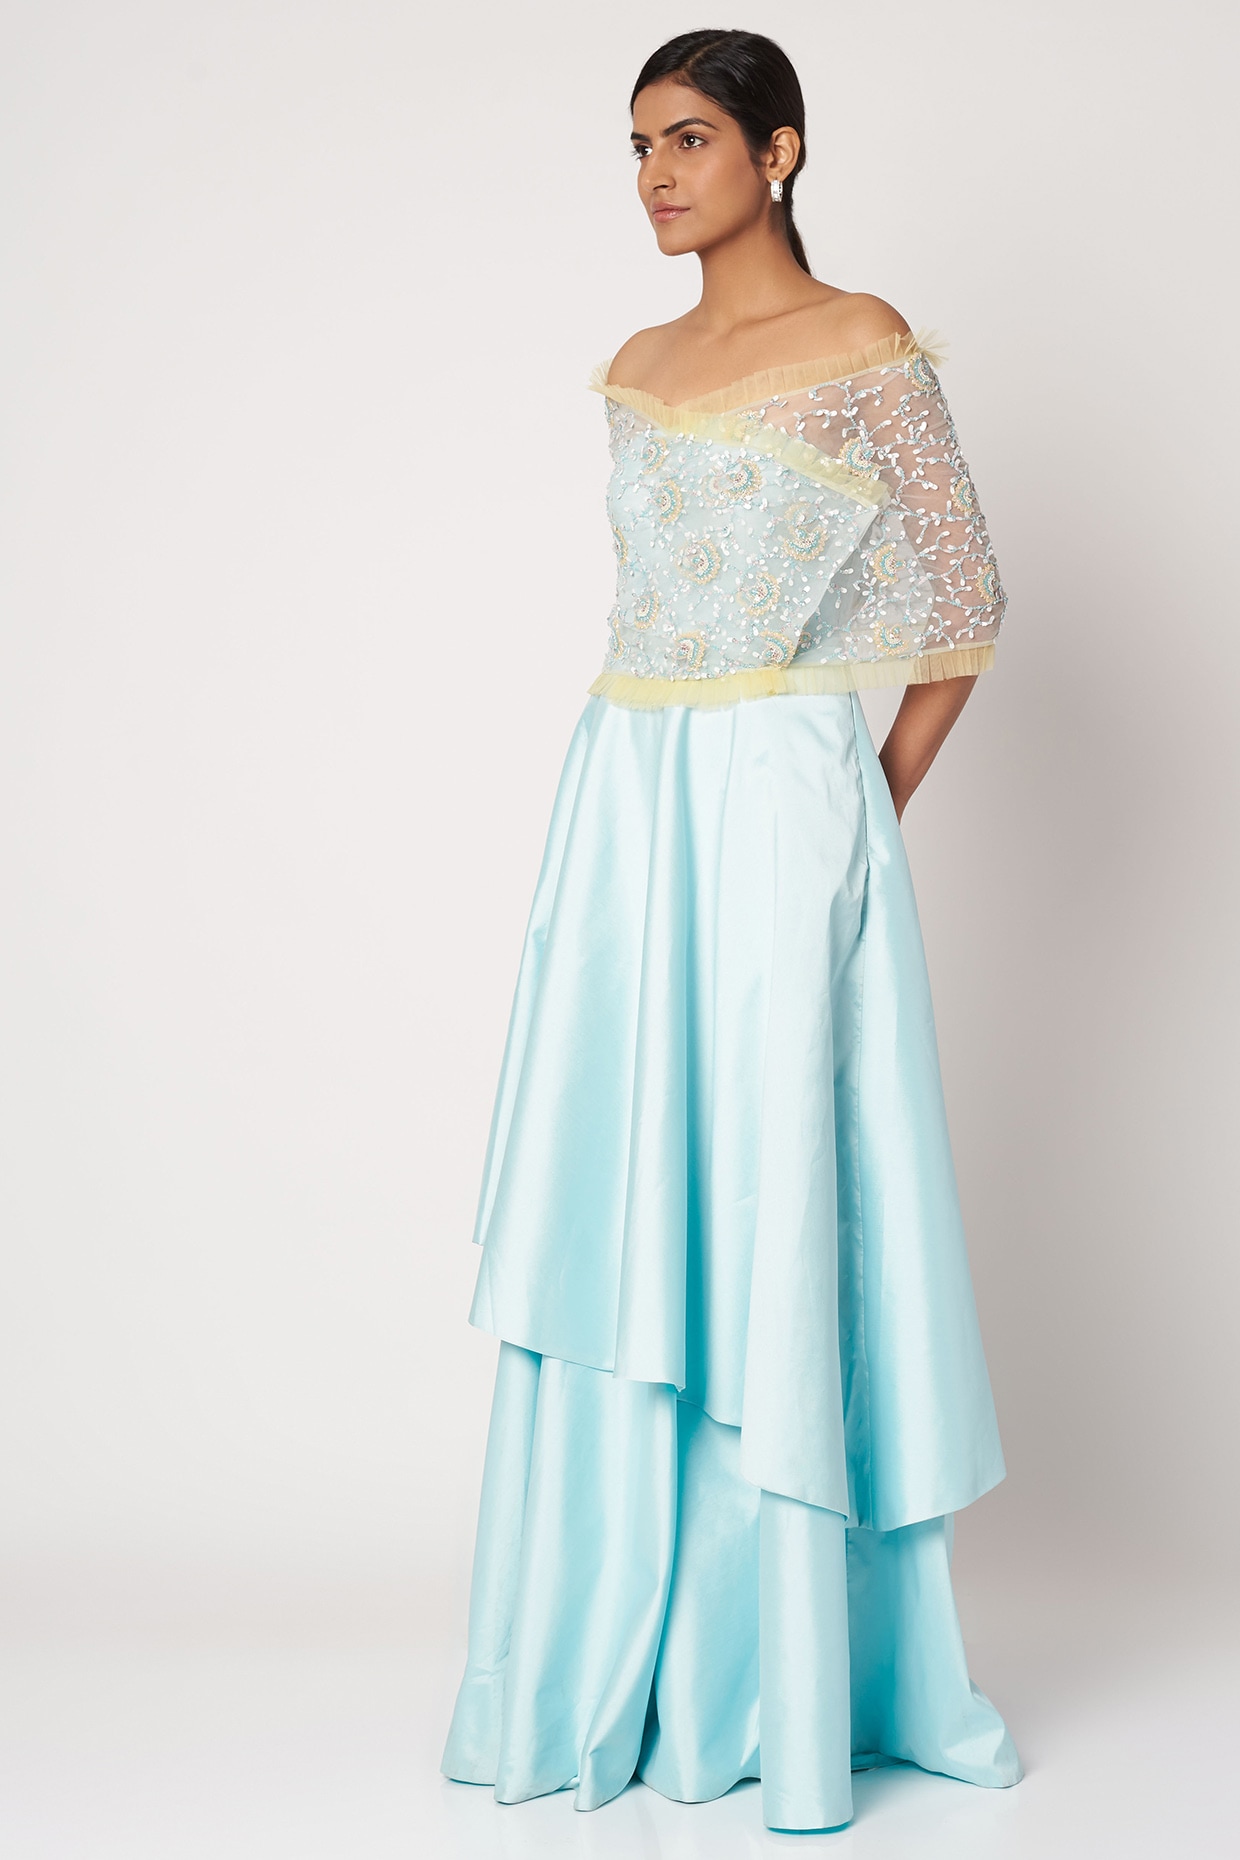 Georgette Sky blue Gown Dress in Embroidered - GWU0630